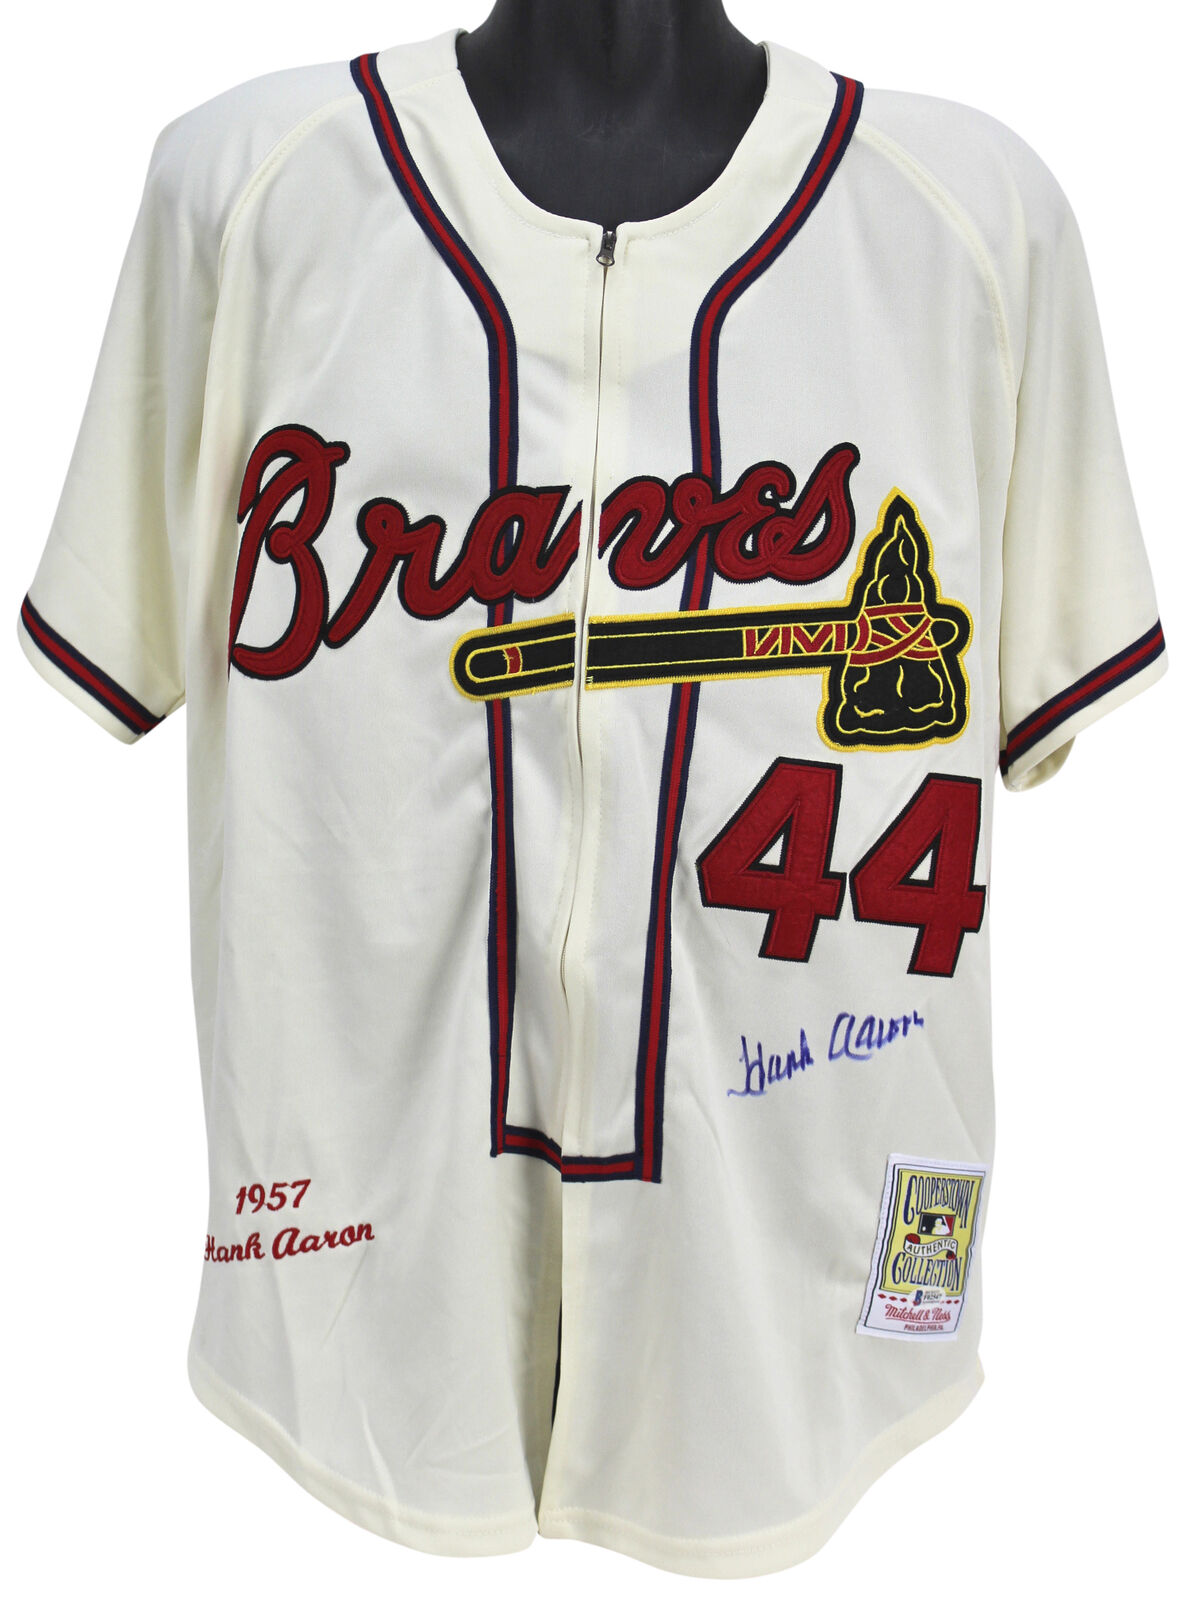 Hank Aaron Signed Mitchell & Ness Cooperstown Collection Old